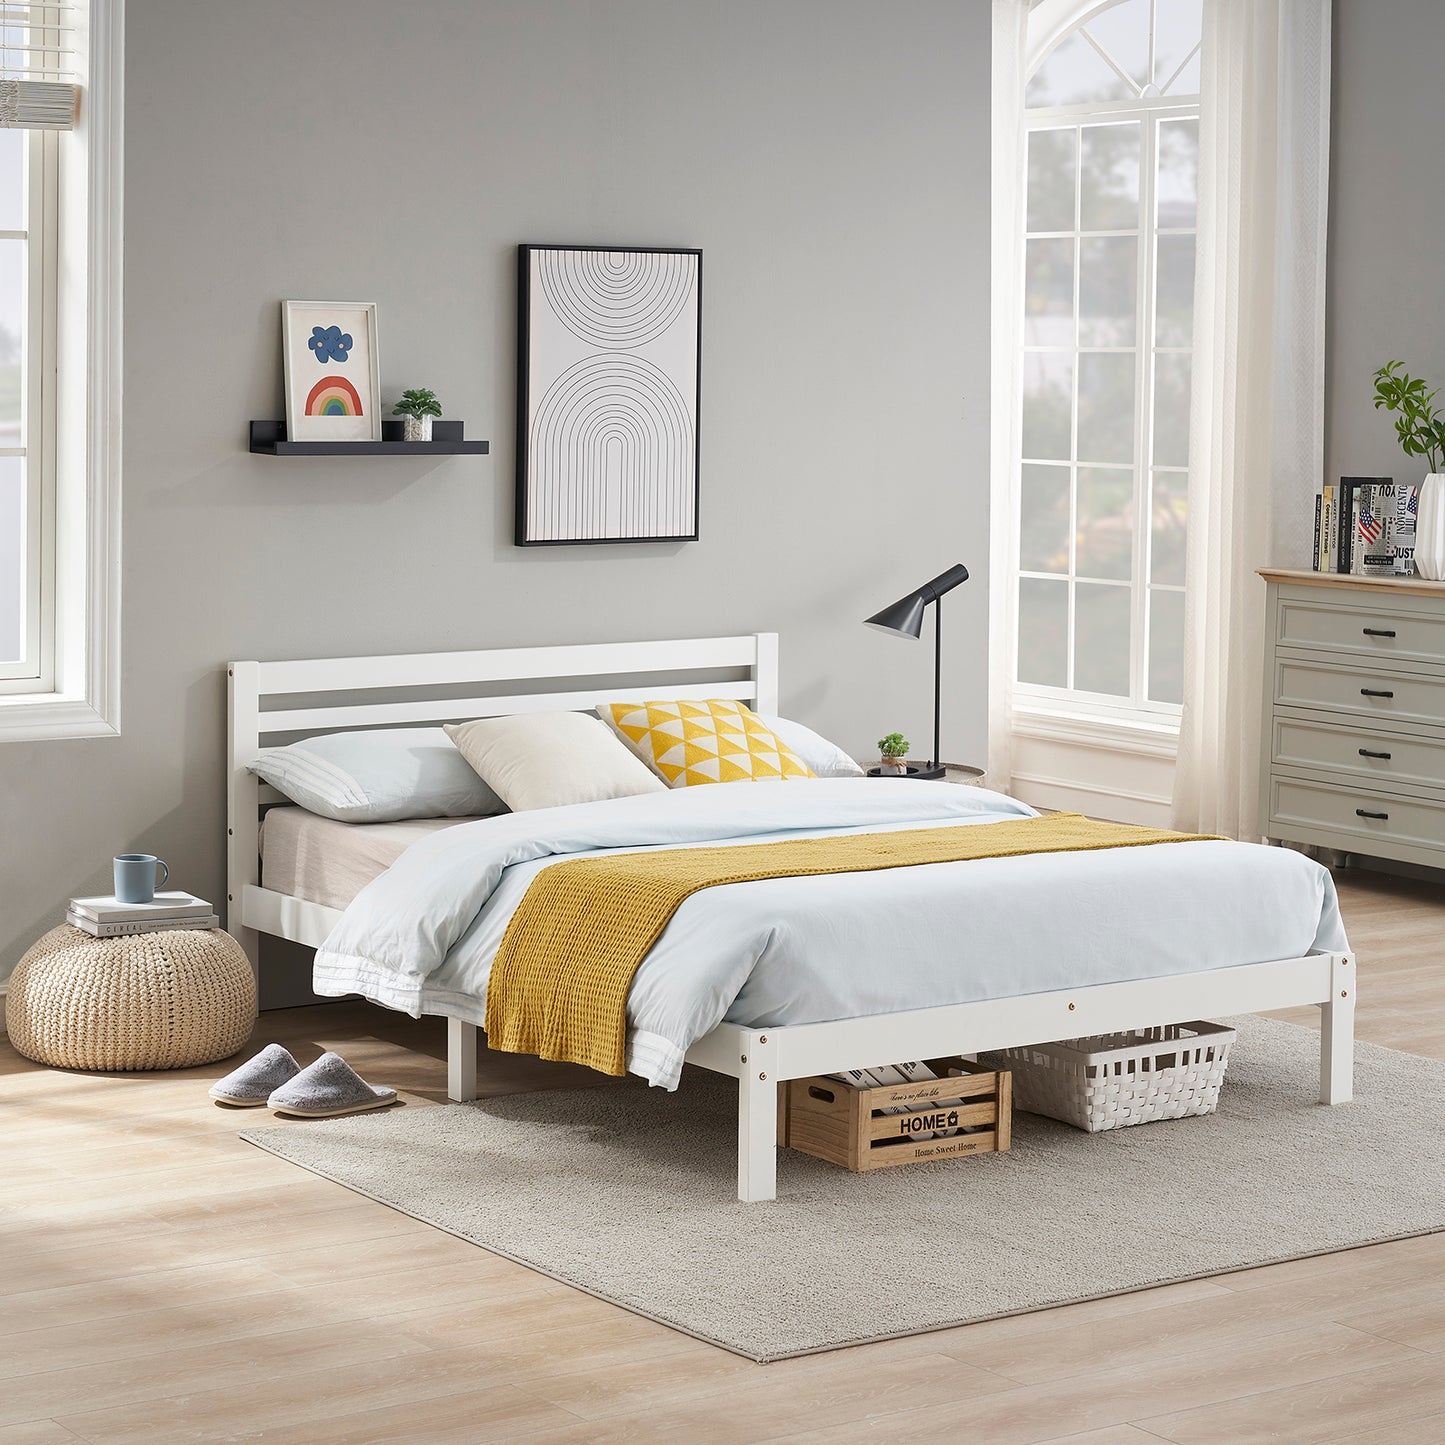 BEAN Double Pine Wooden Bed 148*196cm - White